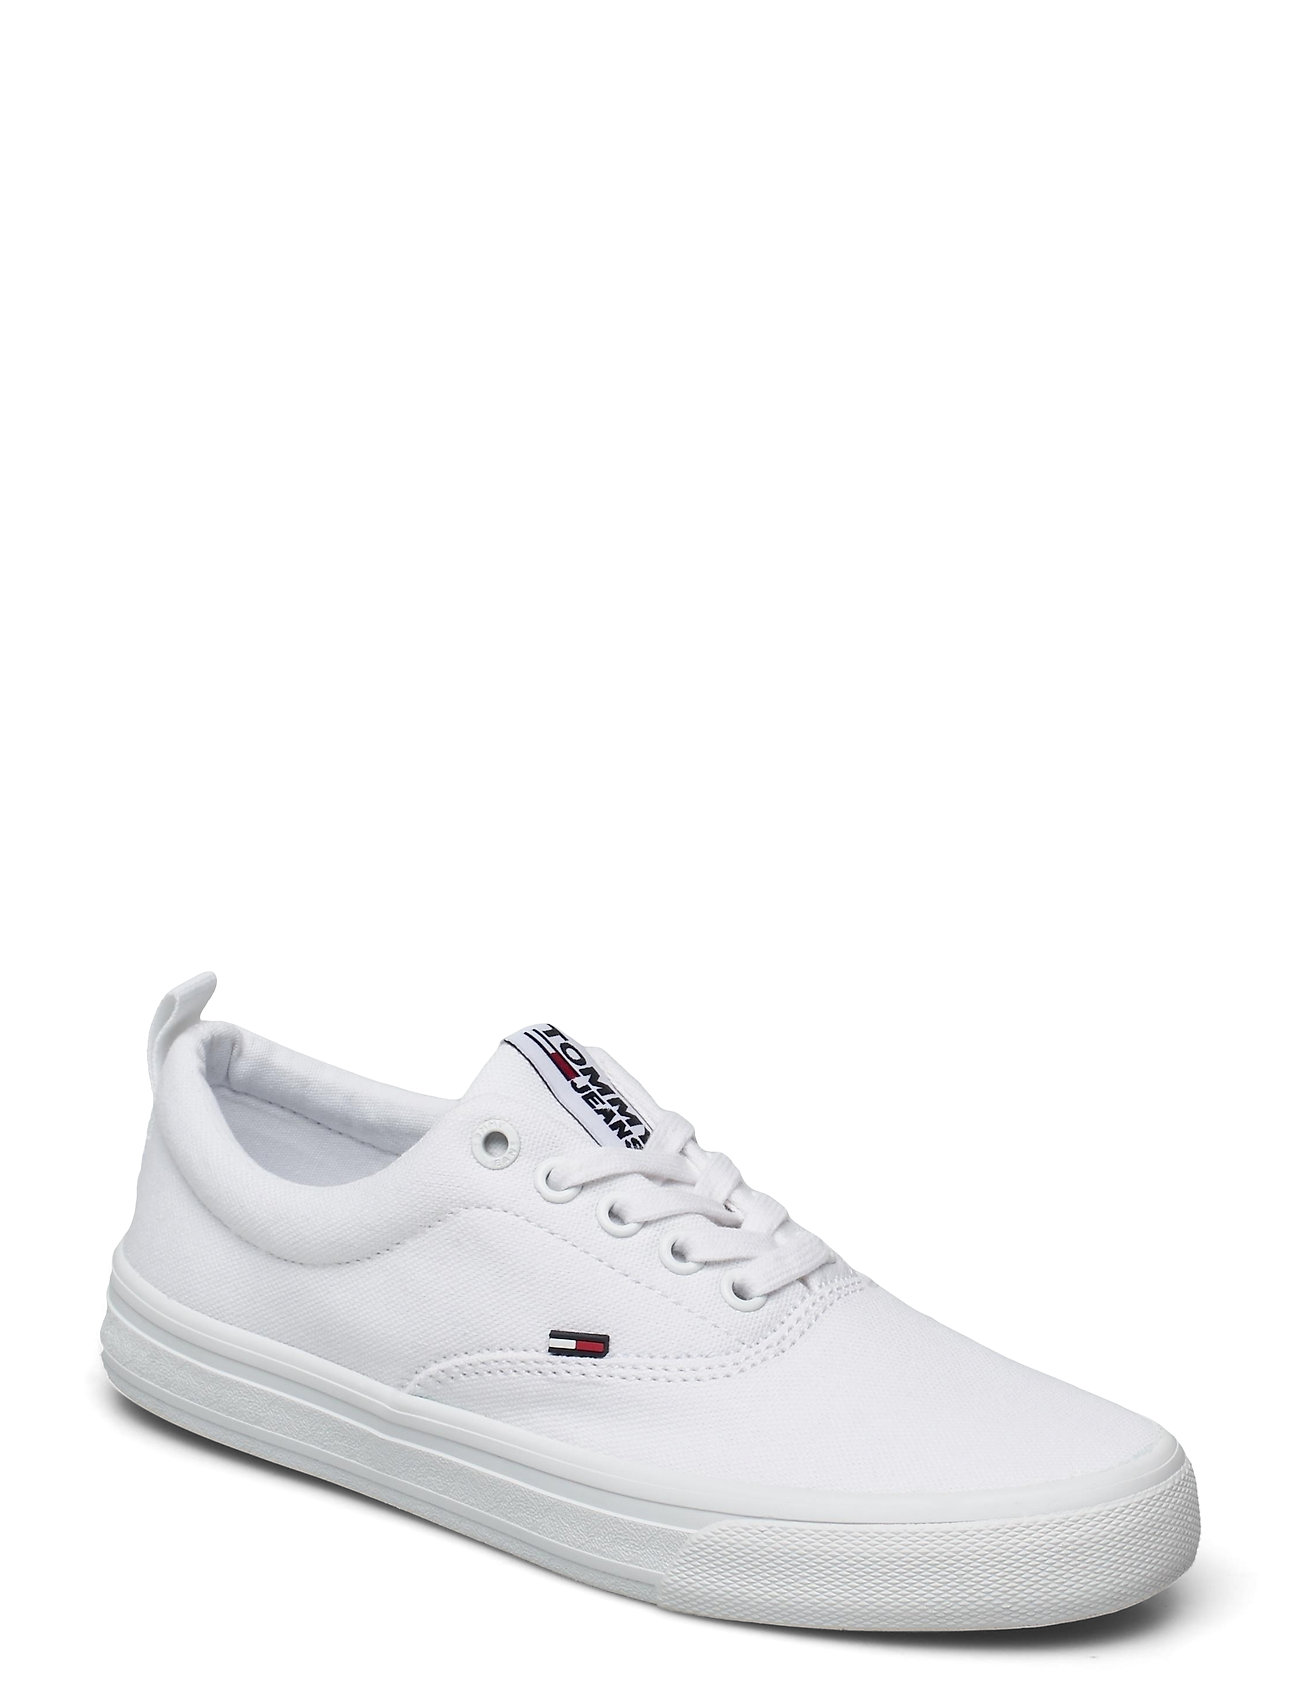 Tommy Hilfiger - WMN CLASSIC TOMMY JEANS SNEAKER - sneakers med lavt skaft - white - 0